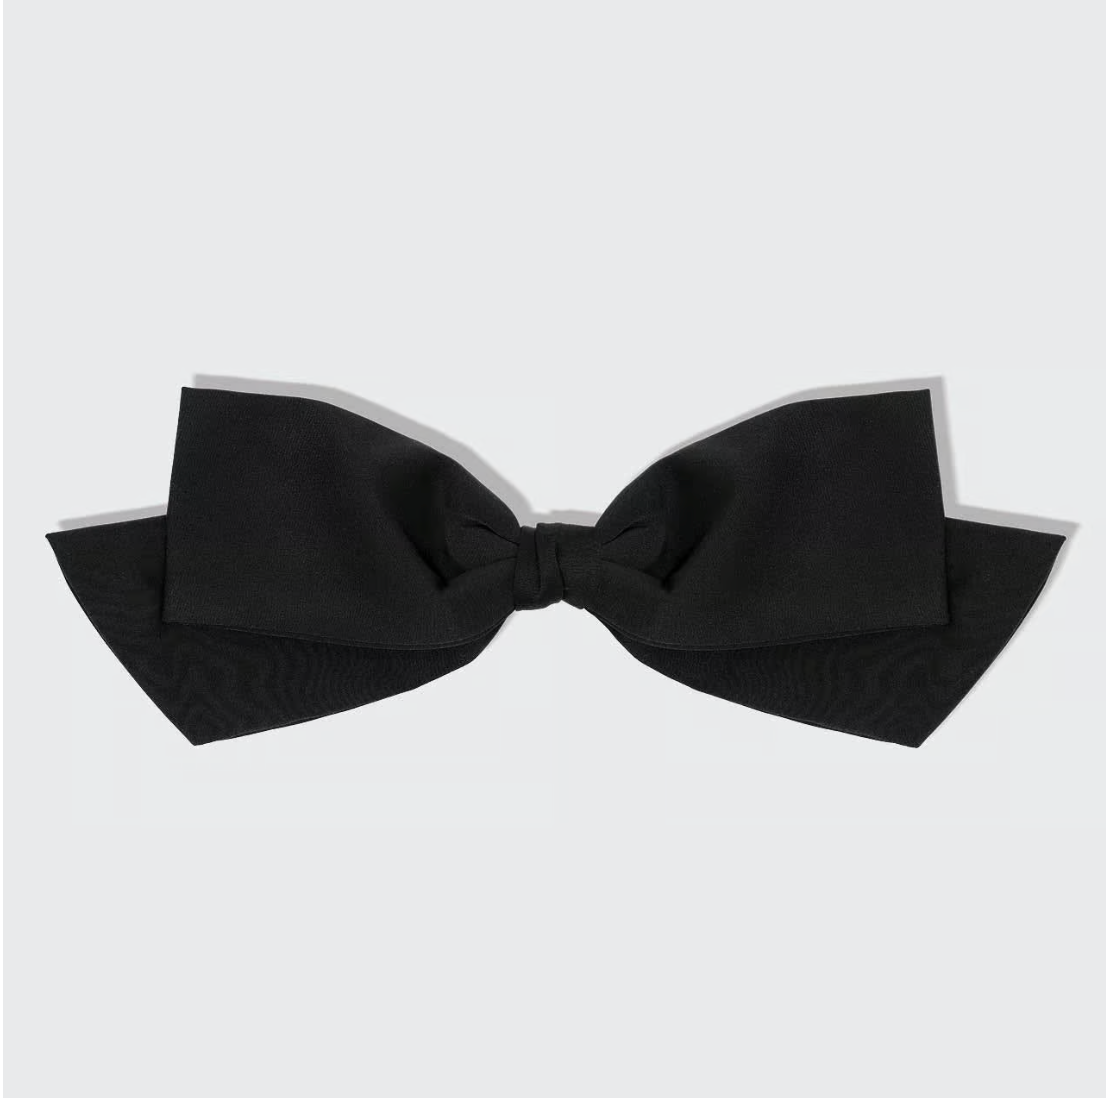 KITSCH - Recycled Fabric Bow Hair Clip - Black